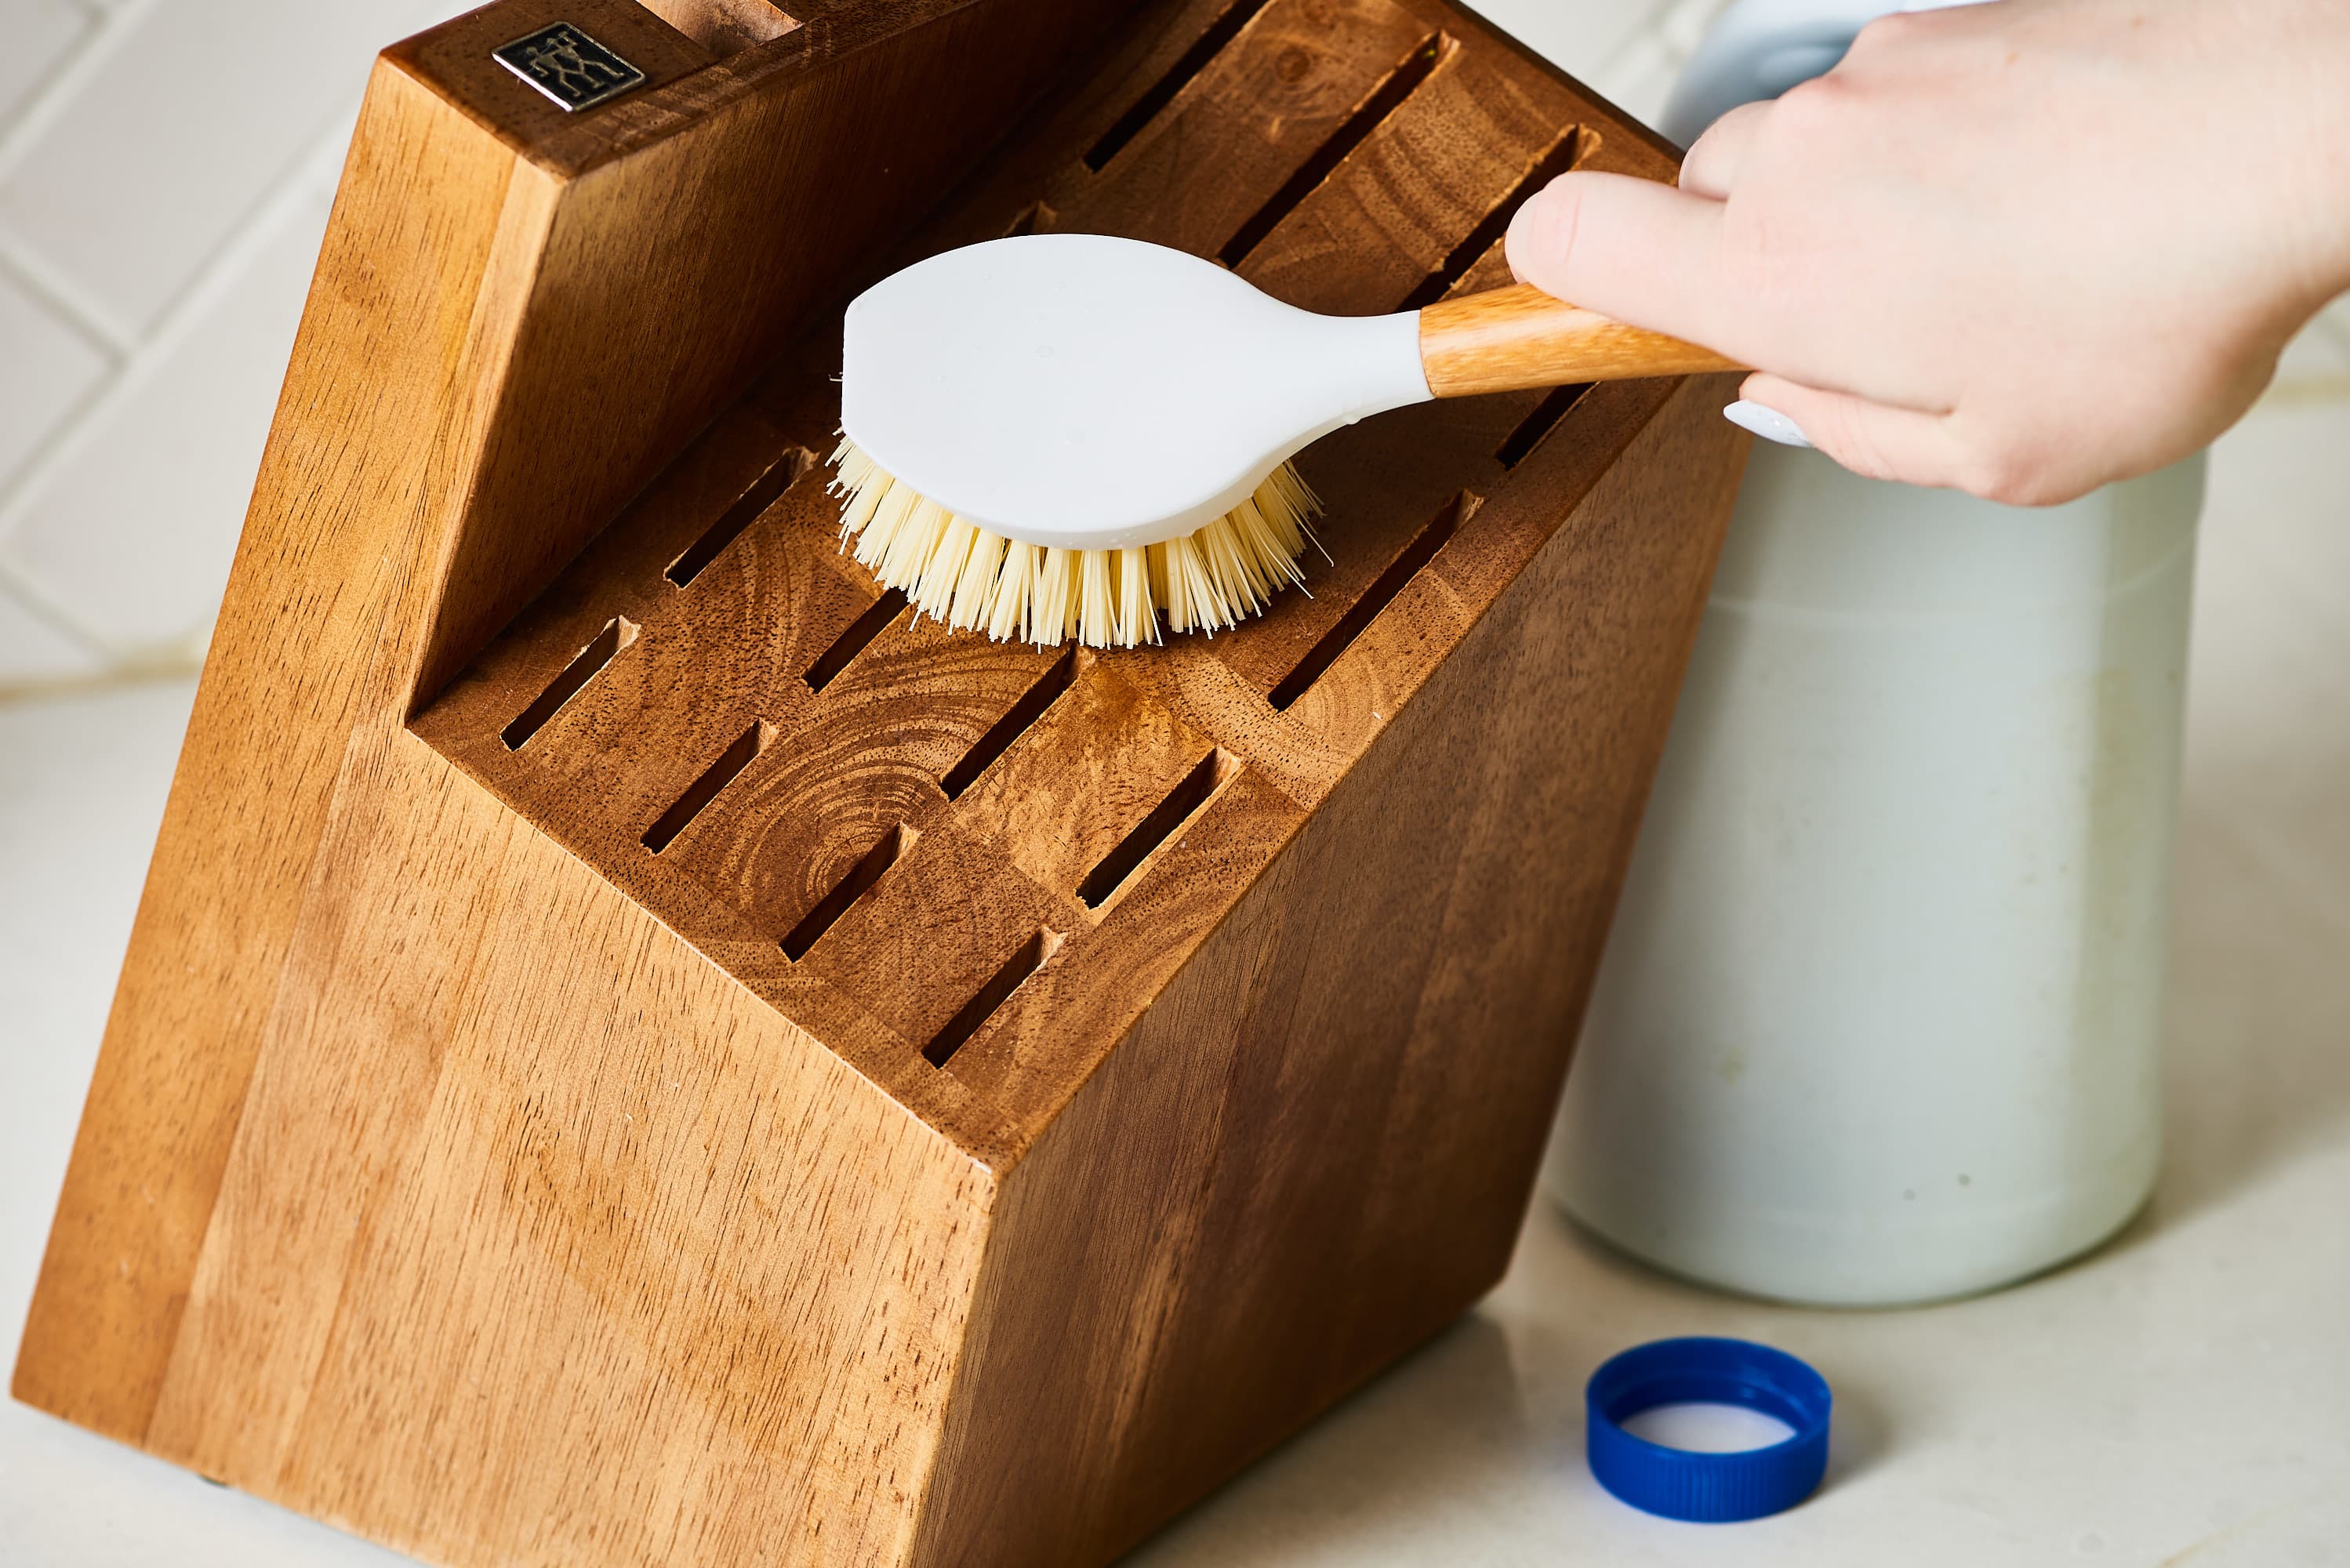 Your Knife Block Is Full of Mold—Here's How to Clean It